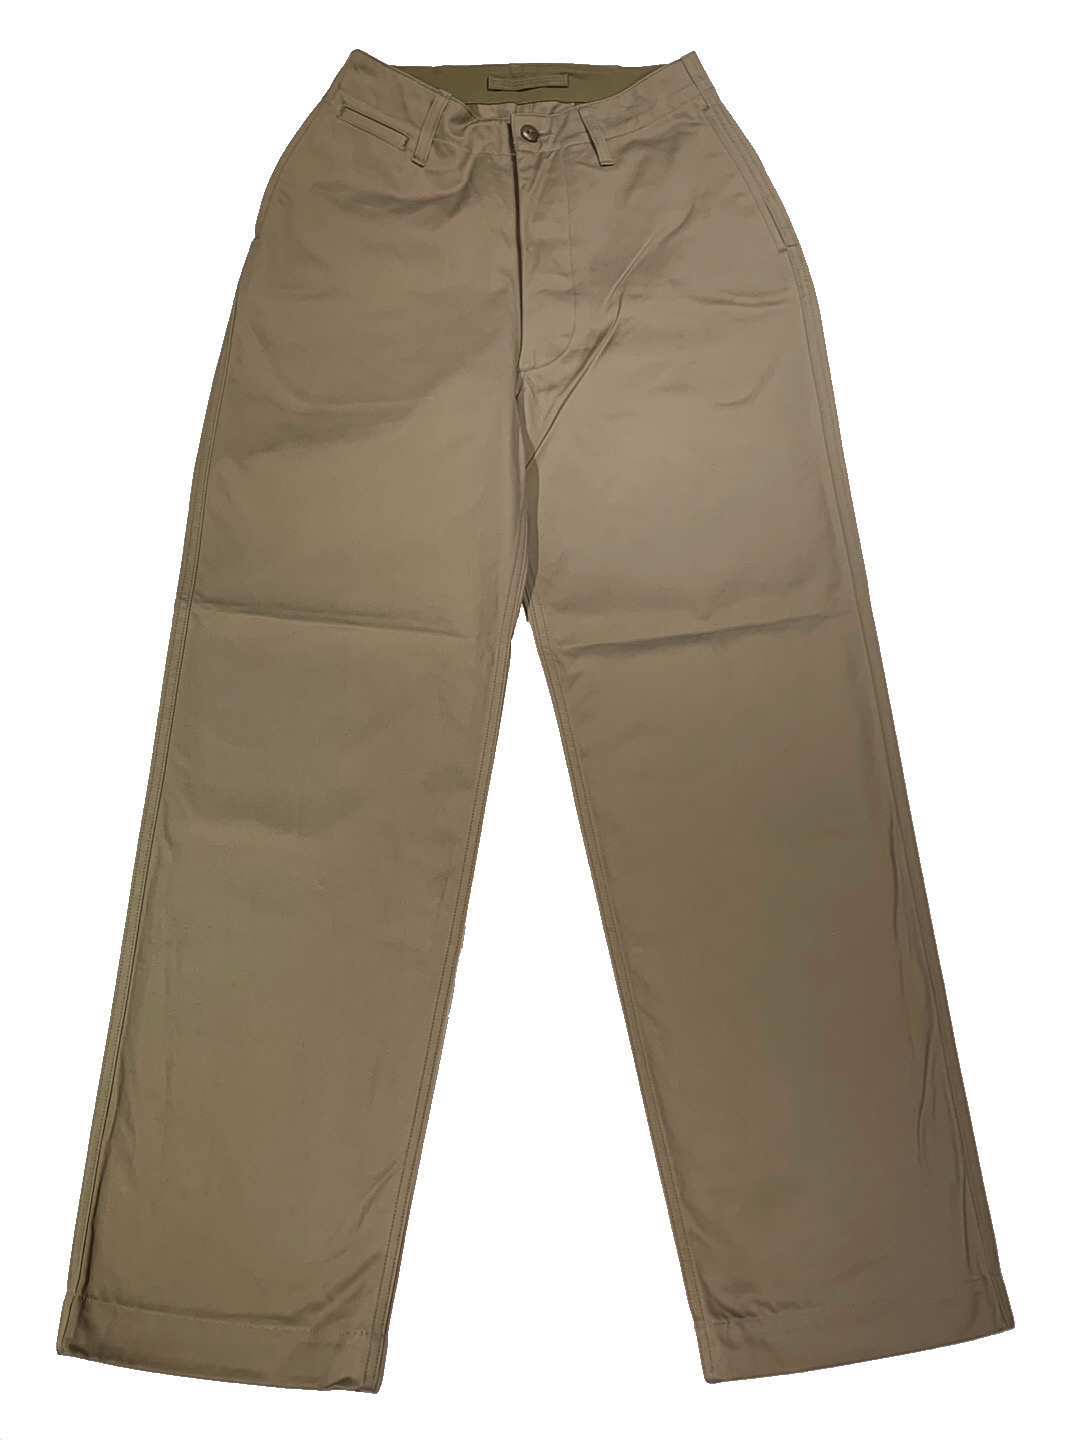 Hummingbirds'hill shop / Nigel Cabourn - BASIC CHINO WEST POINT PANT OLIVE